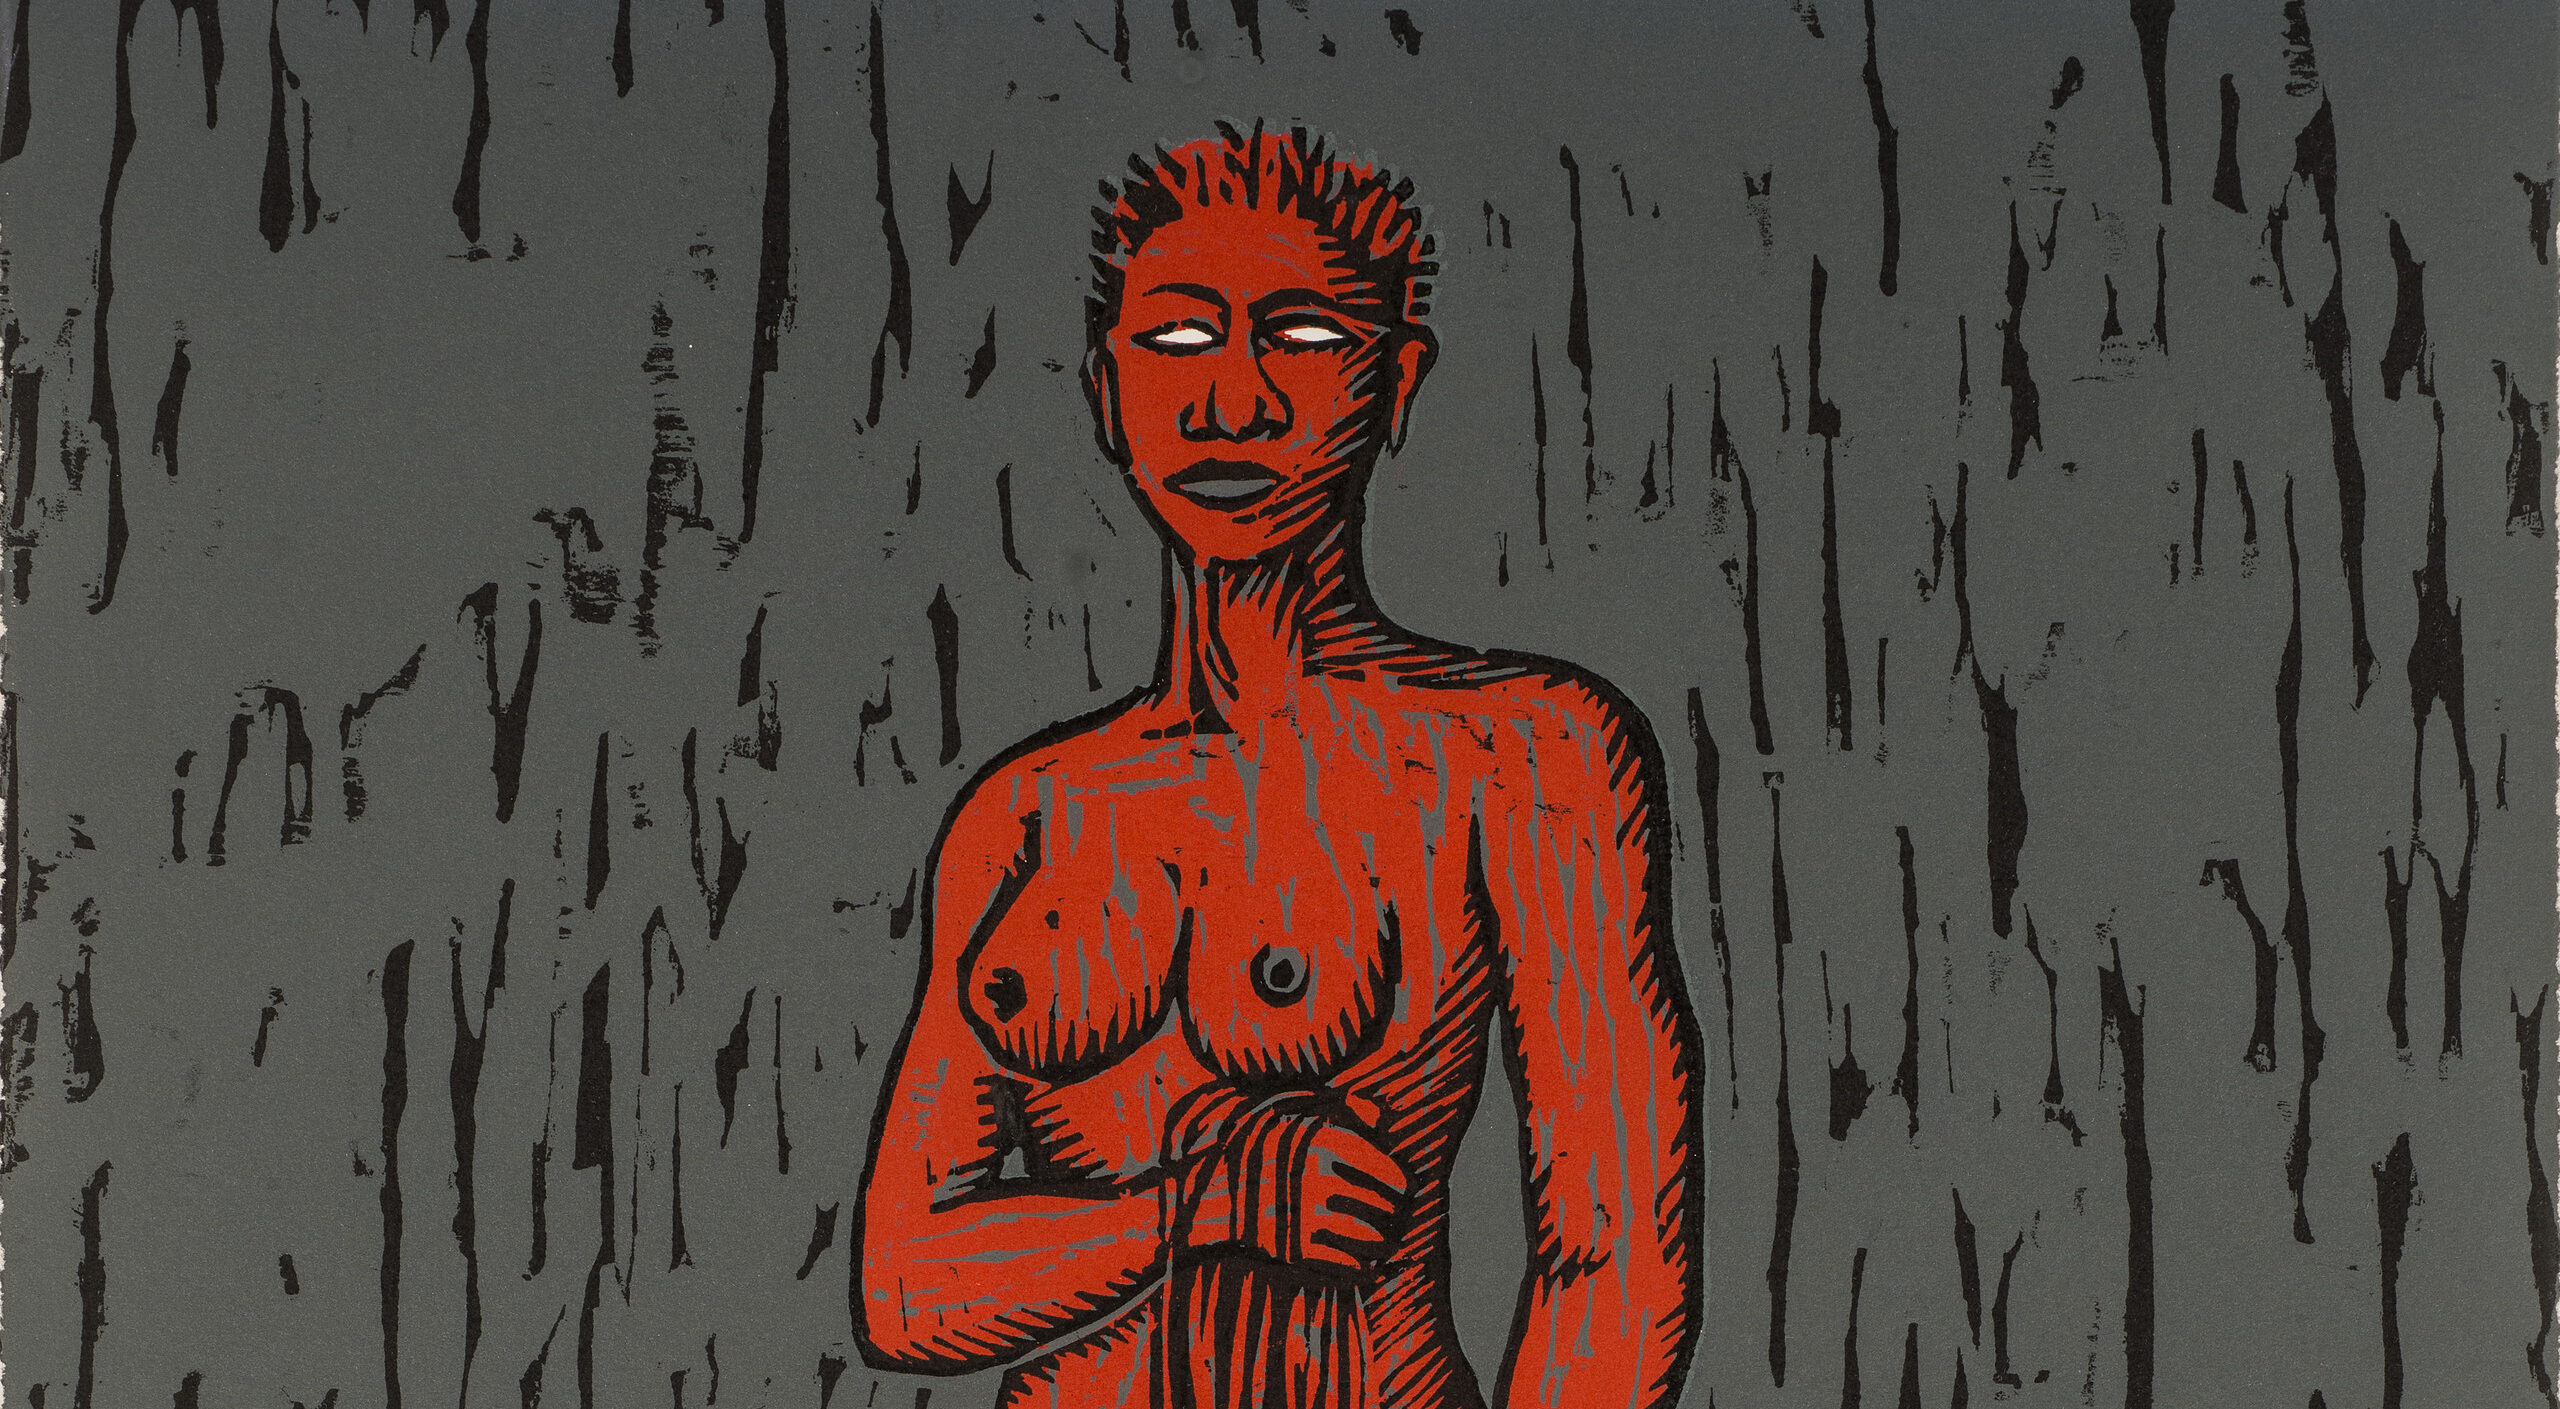 A red, nude, adult female figure with white eyes and short-cropped hair stands in a pile of long, dark hair while holding long strands of dark hair in her right hand. In her left hand is a white blade. The background is gray with choppy, vertical, black lines.